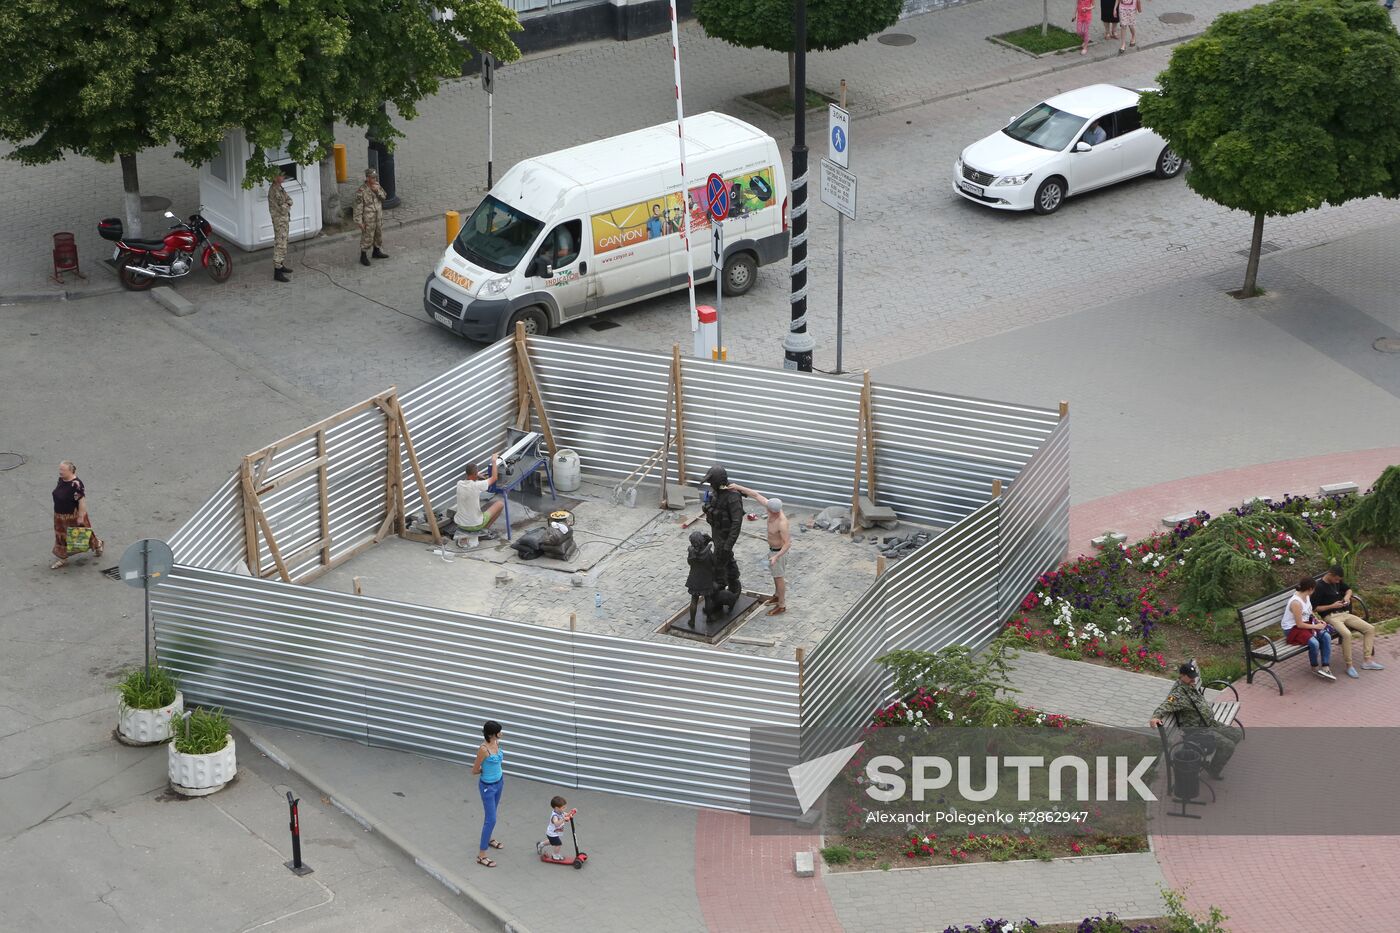 Installing the "Polite People" monument in Simferopol